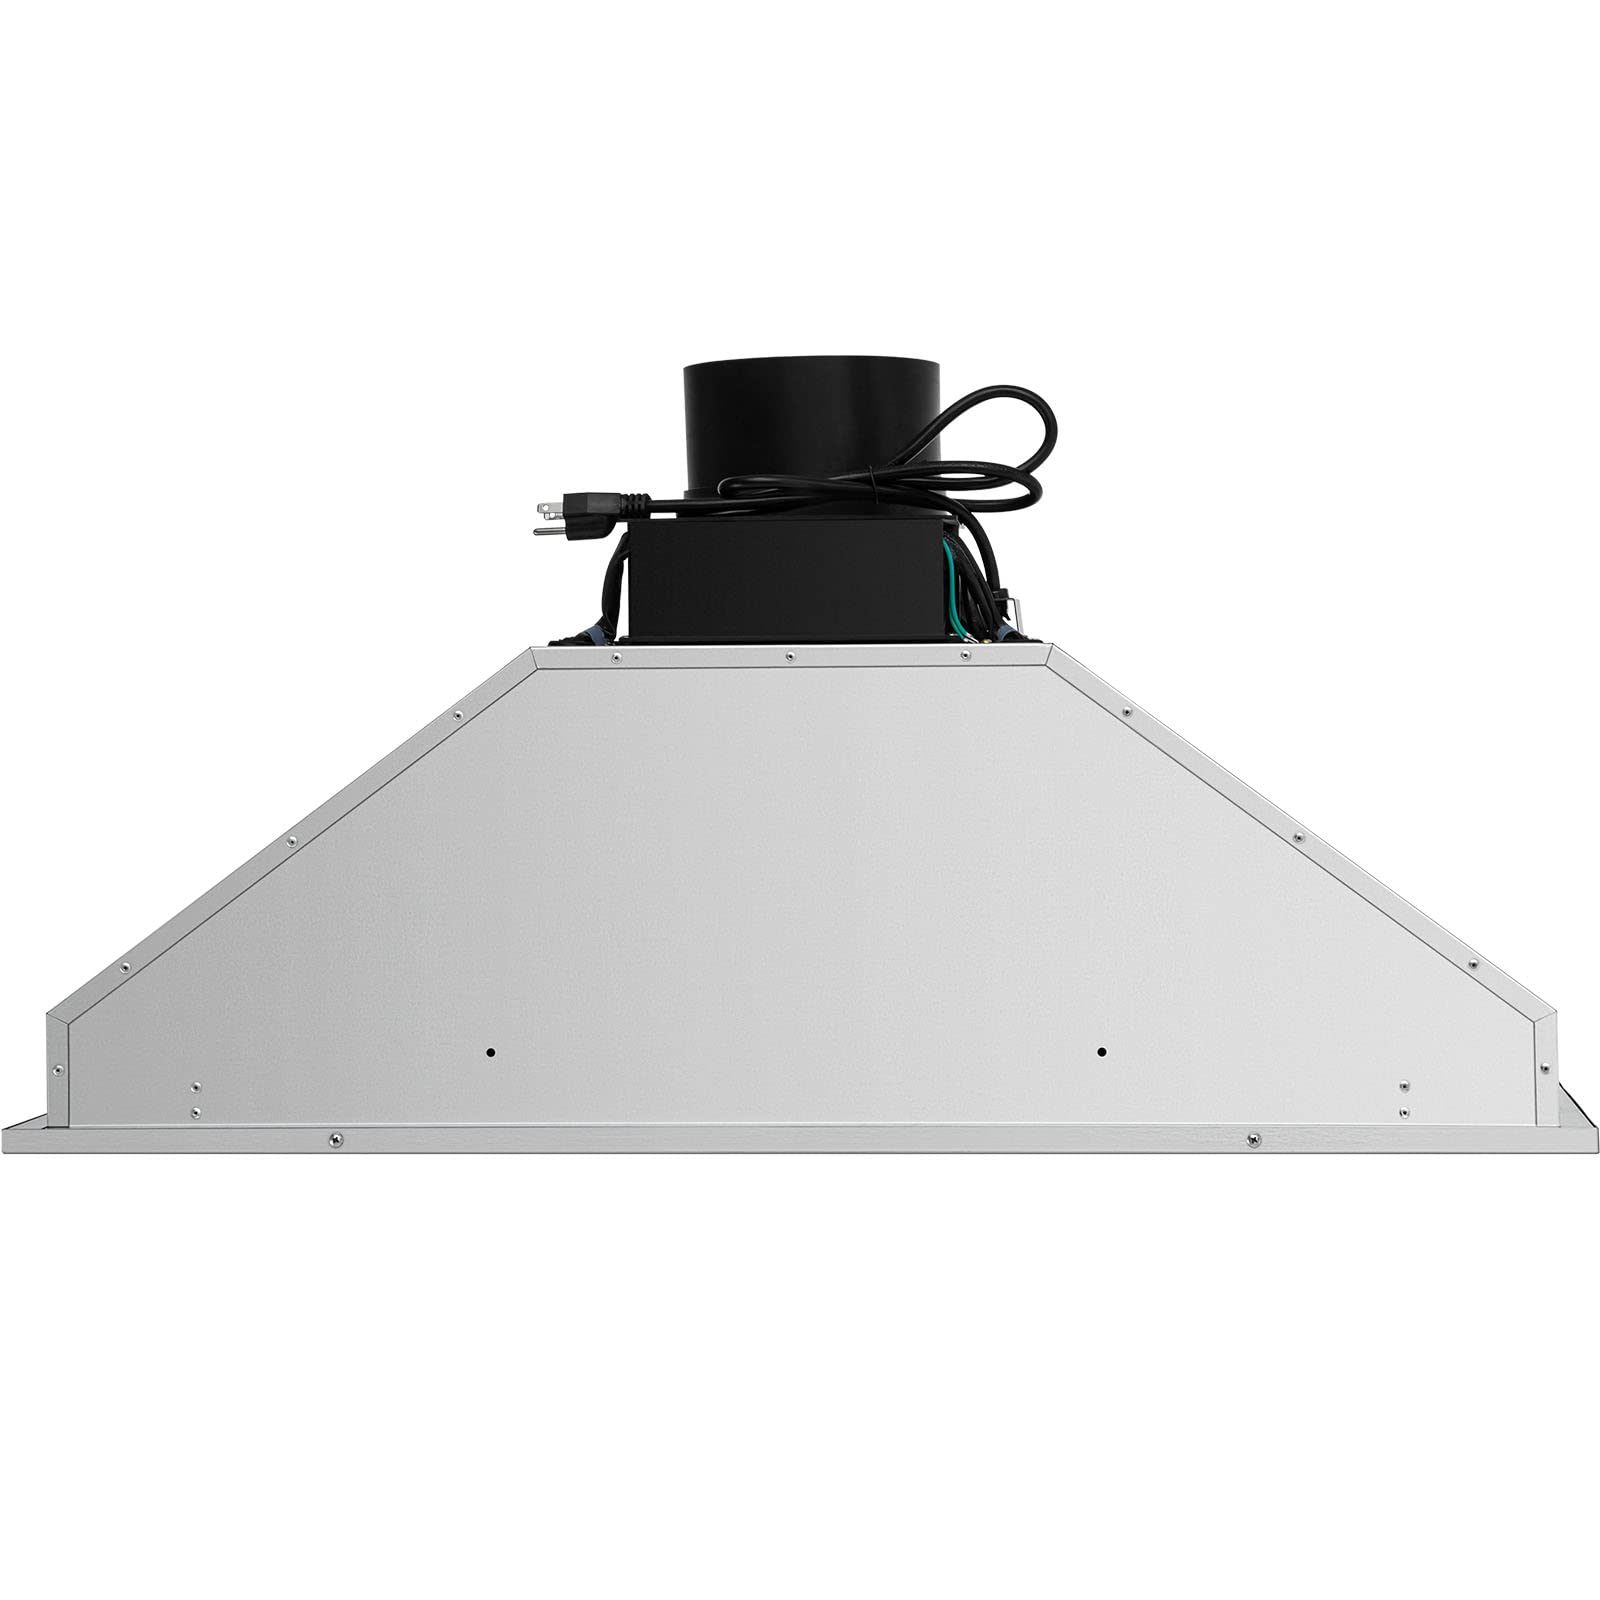 VEVOR Insert Range Hood, 900CFM 4-Speed, 36 Inch Stainless Steel Built-in Kitchen Vent with Touch & Remote Control LED Lights Baffle Filters, Ducted/Ductless Convertible, ETL Listed